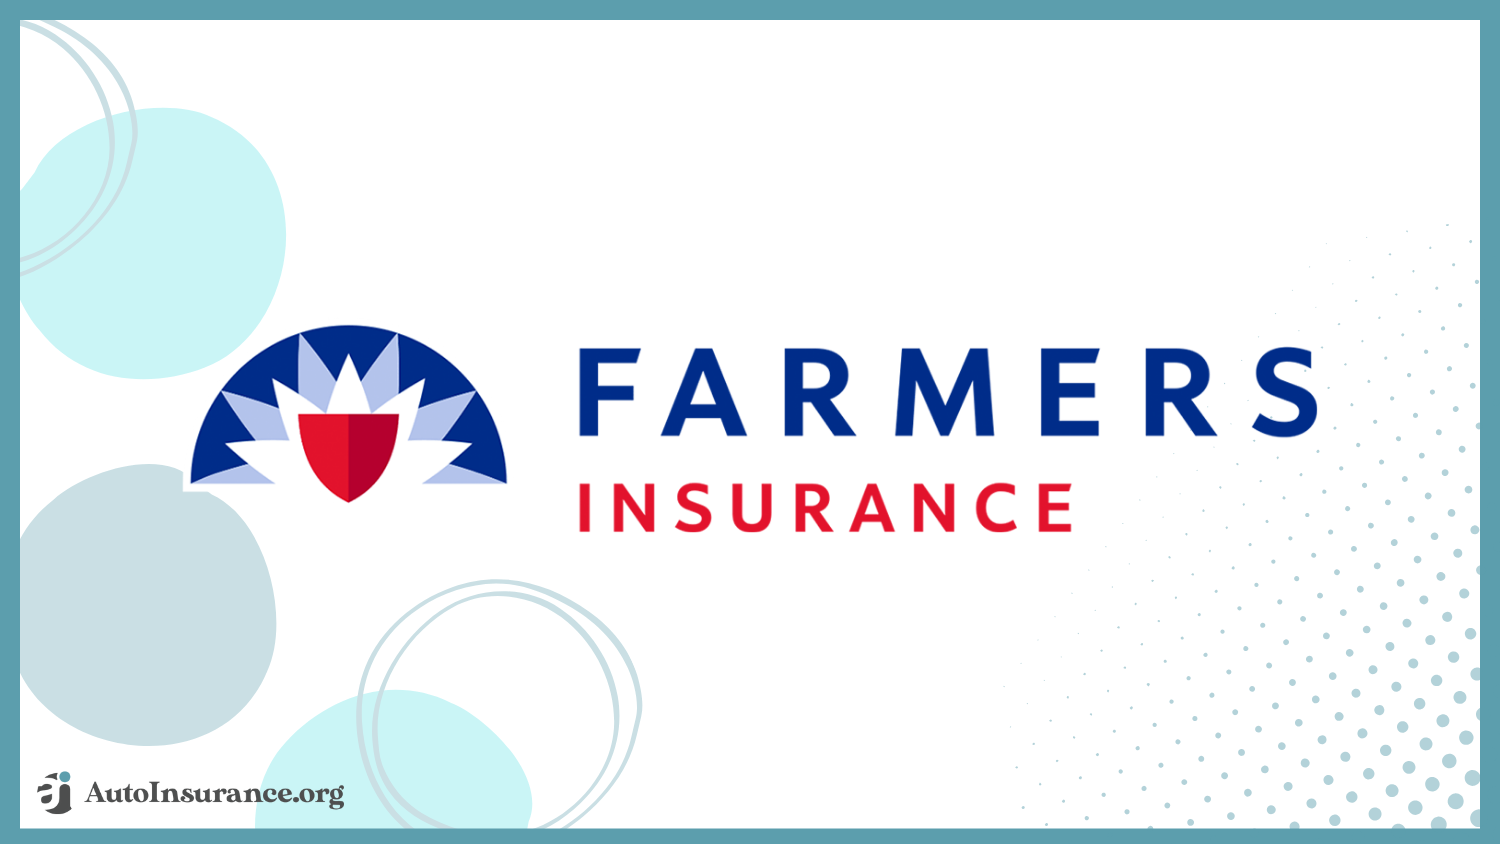 Farmers: 10 Best Auto Insurance Companies for Accident Forgiveness